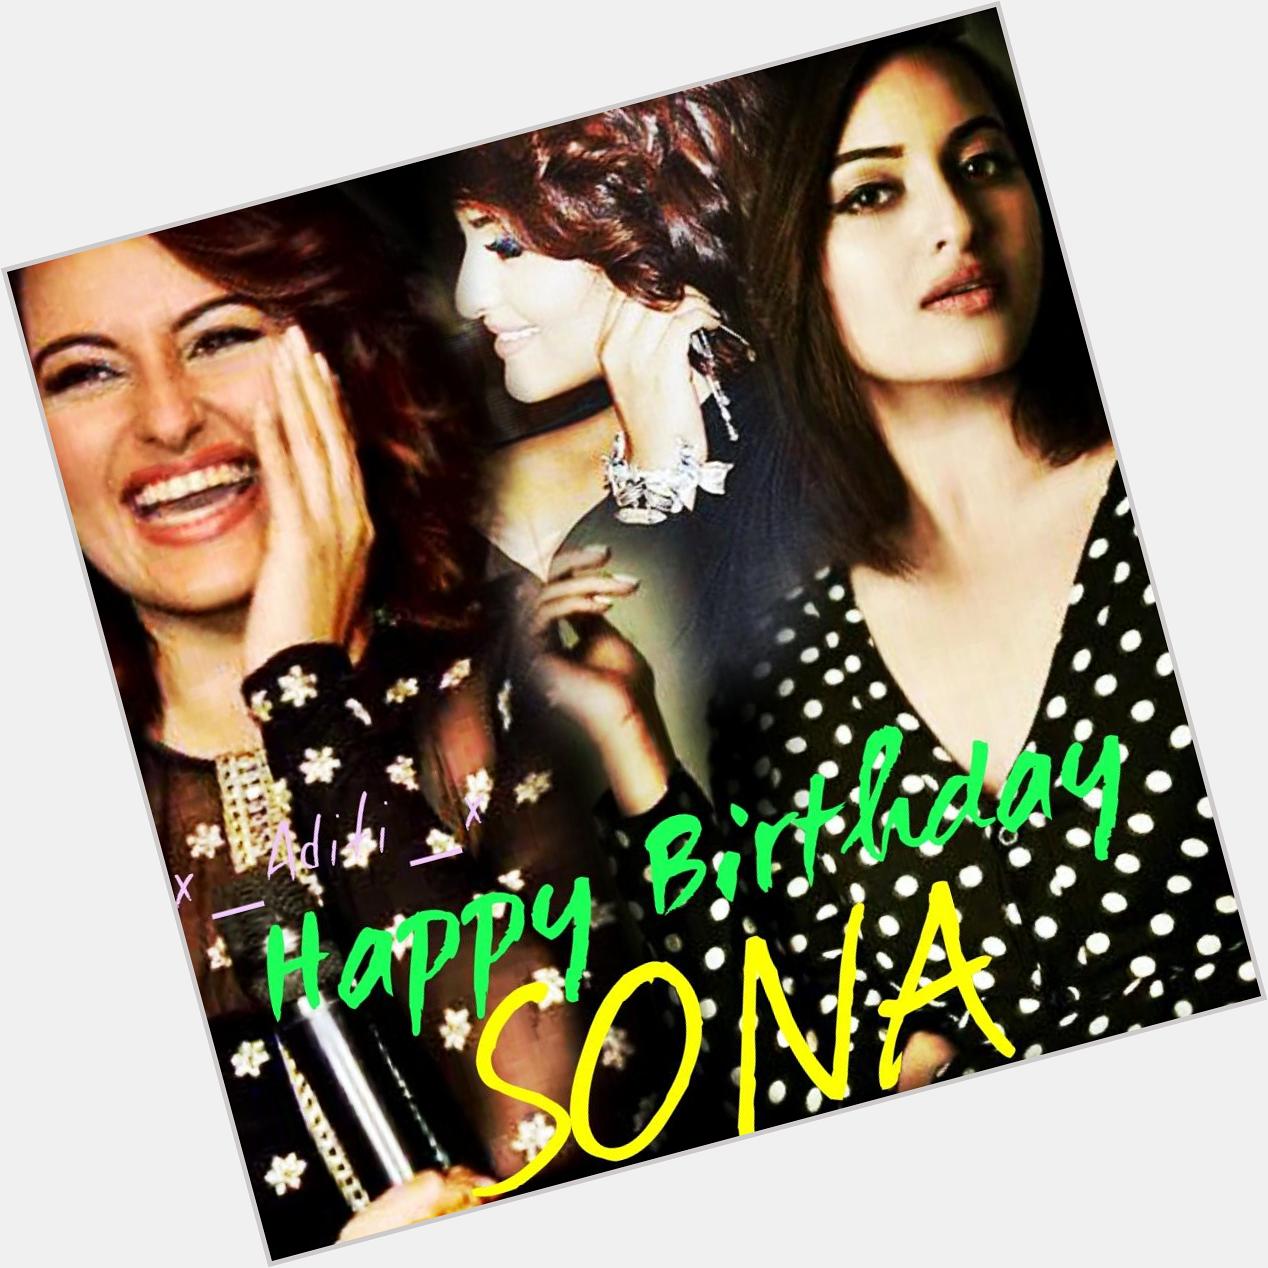 Wish you a veryyy happy birthday SONAKSHI SINHA!!
May you get all the happiness in life & have a fab year ahead  